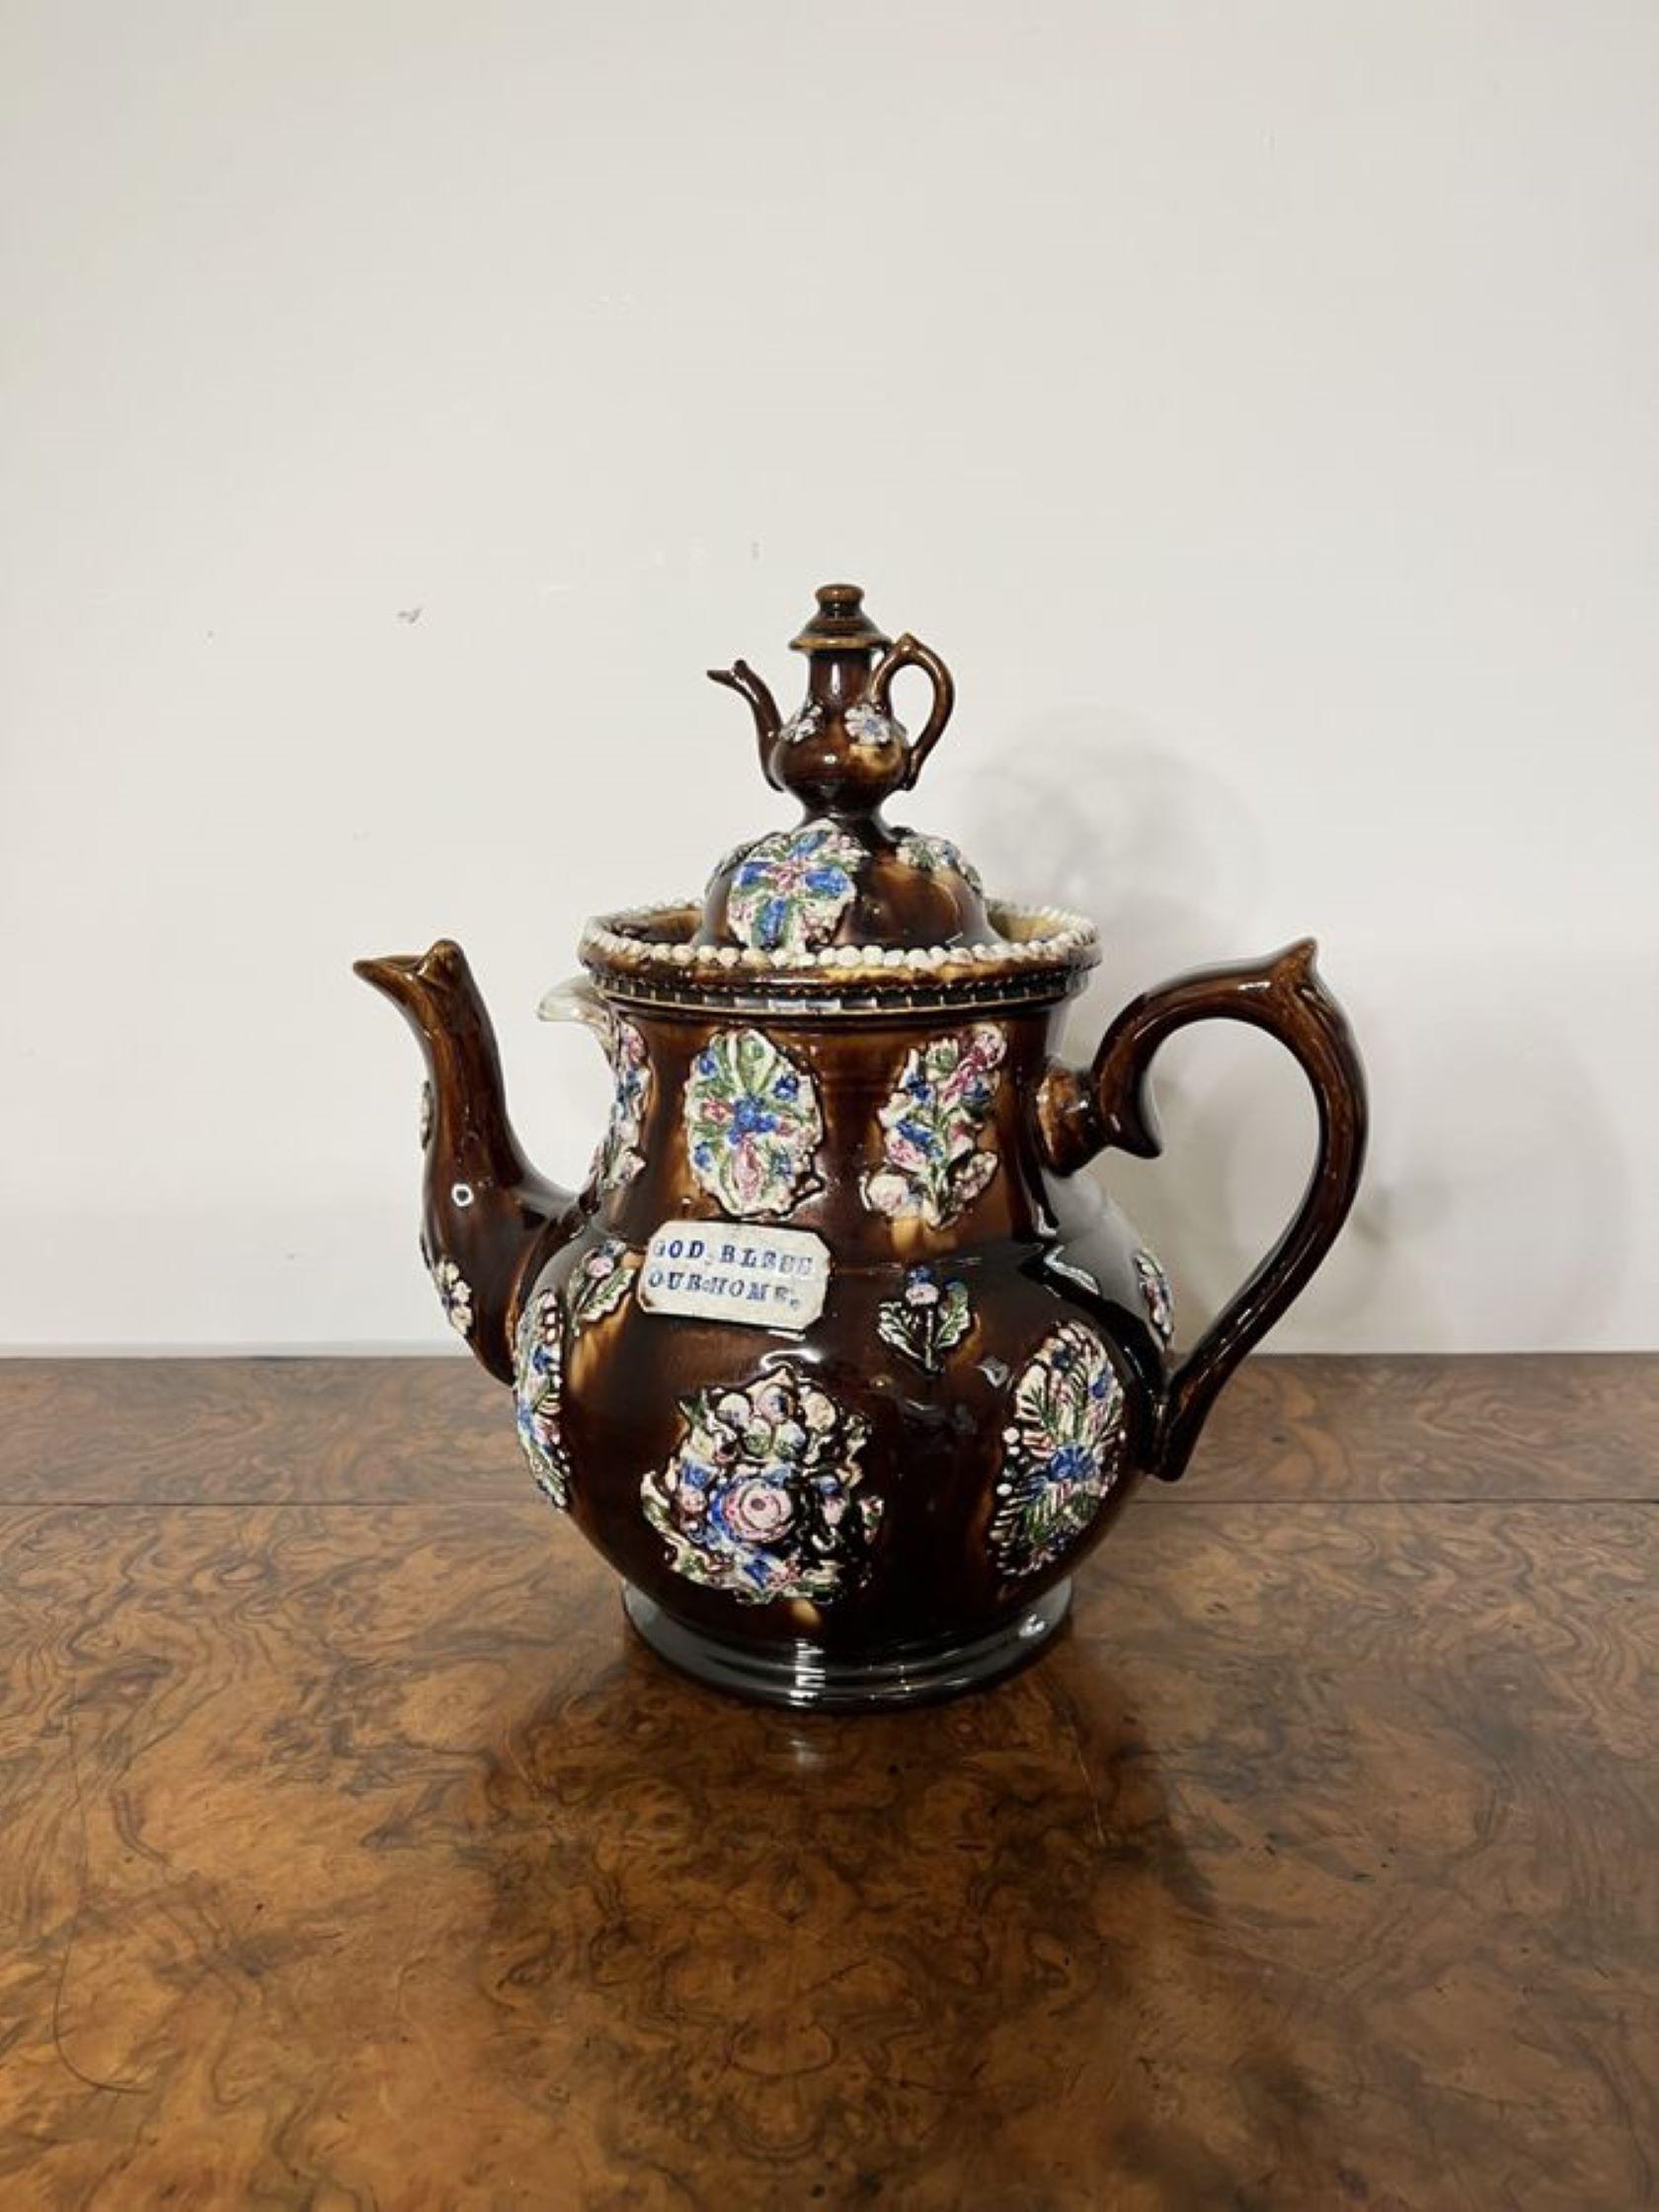 Large unusual antique bargeware tea pot with 'GOD BLESS OUR HOME' inscribed on a brown bargeware teapot decorated with wonderful bunches of flowers in blue, green, pink and white colours, the lid having a small teapot finial to the top with a shaped